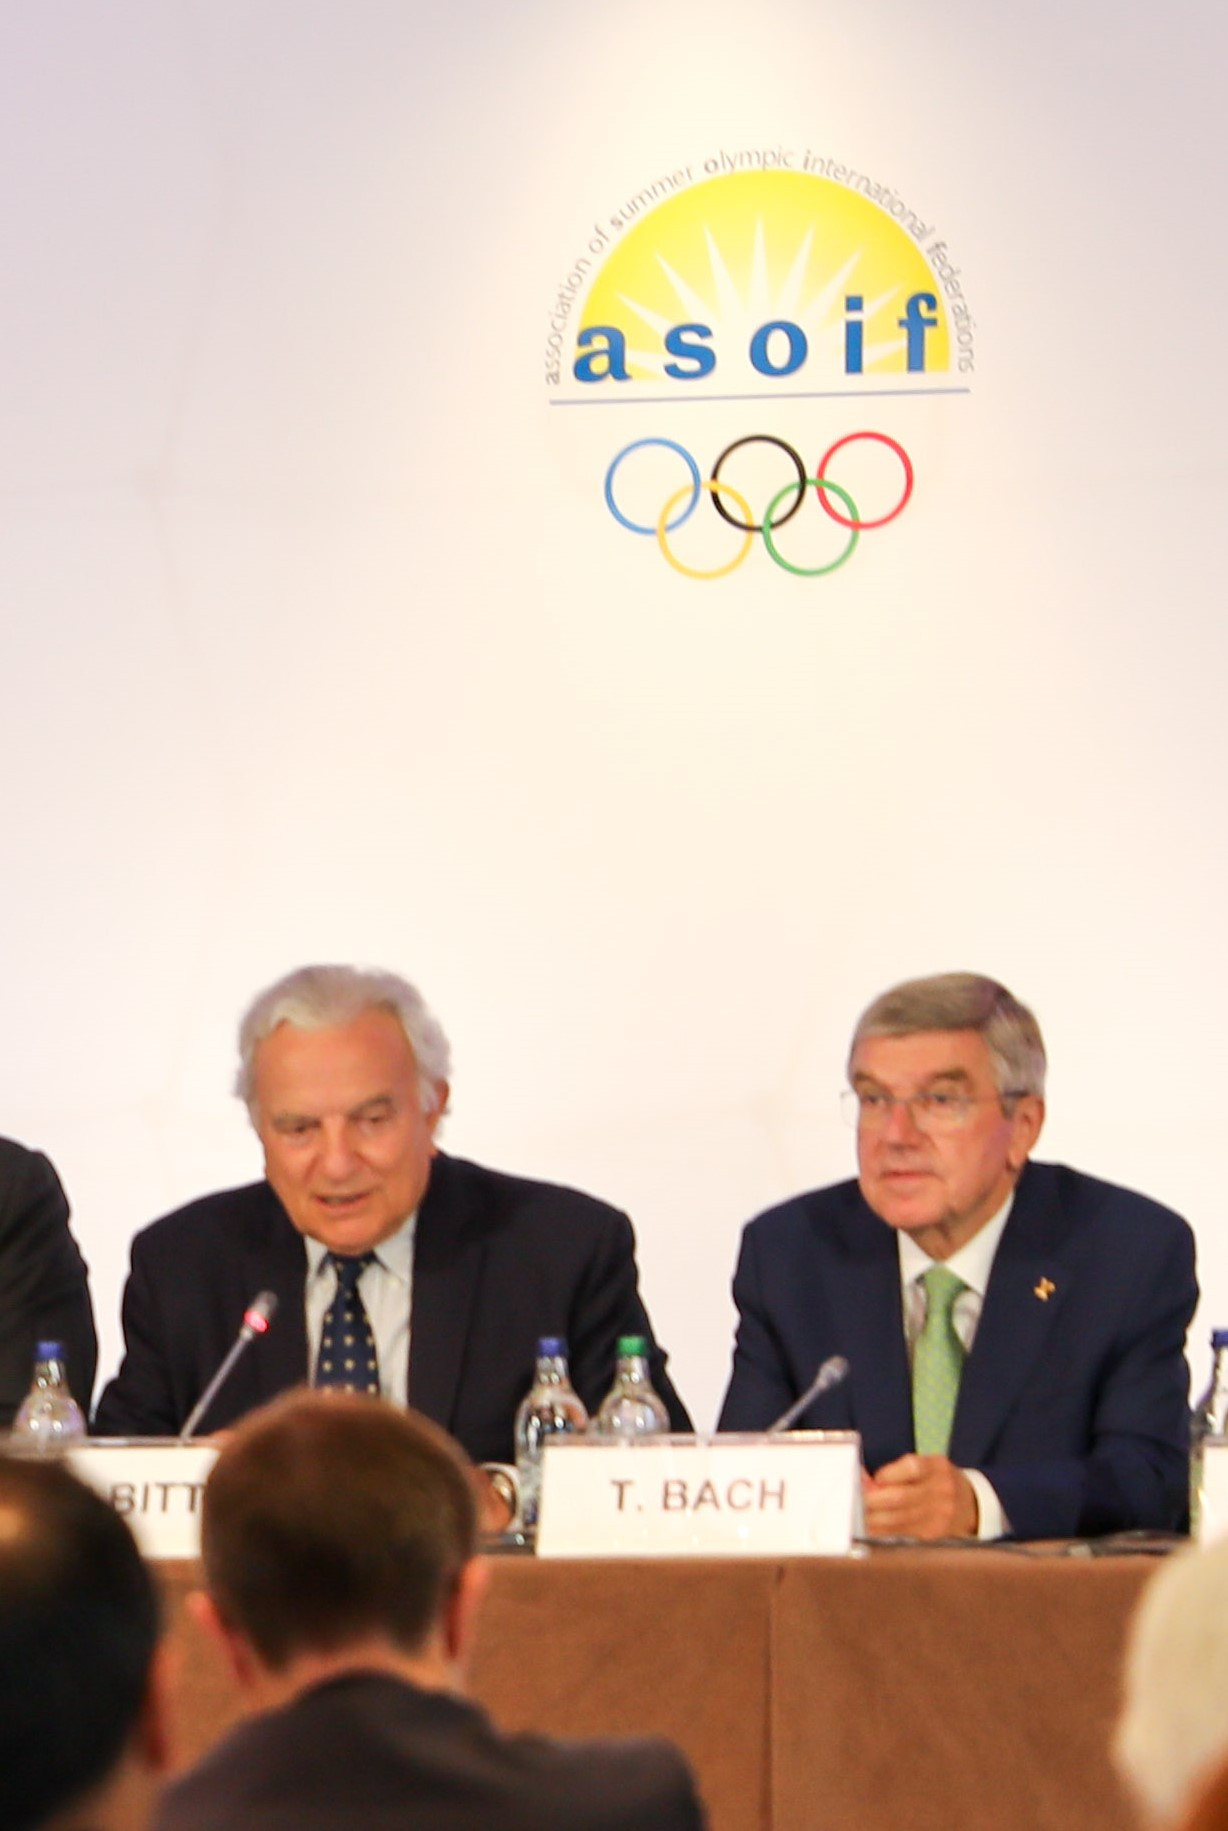 ASOIF "drafting" plans to set up new commission for recognition of sports for IOC